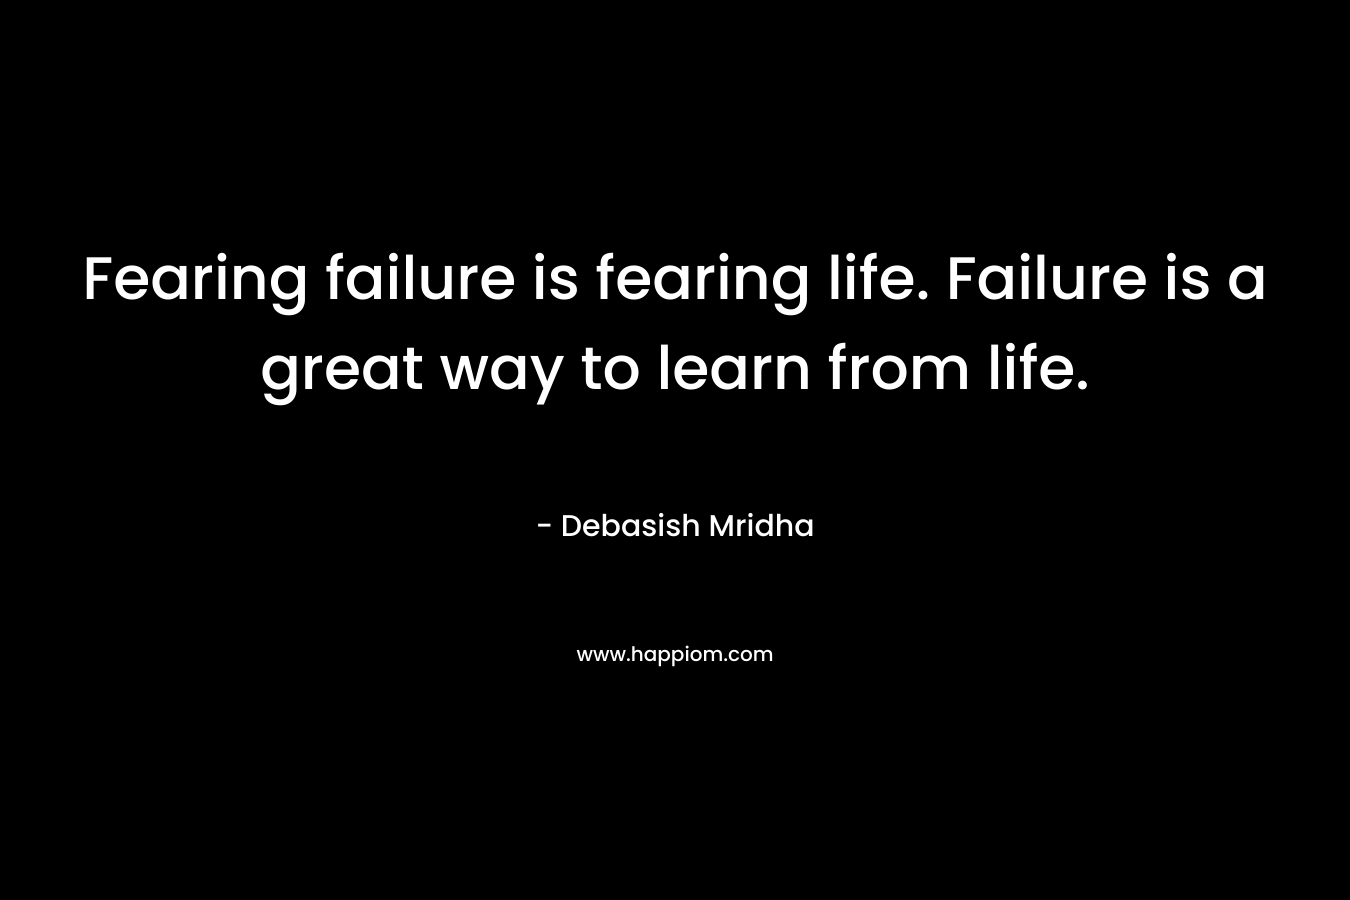 Fearing failure is fearing life. Failure is a great way to learn from life.